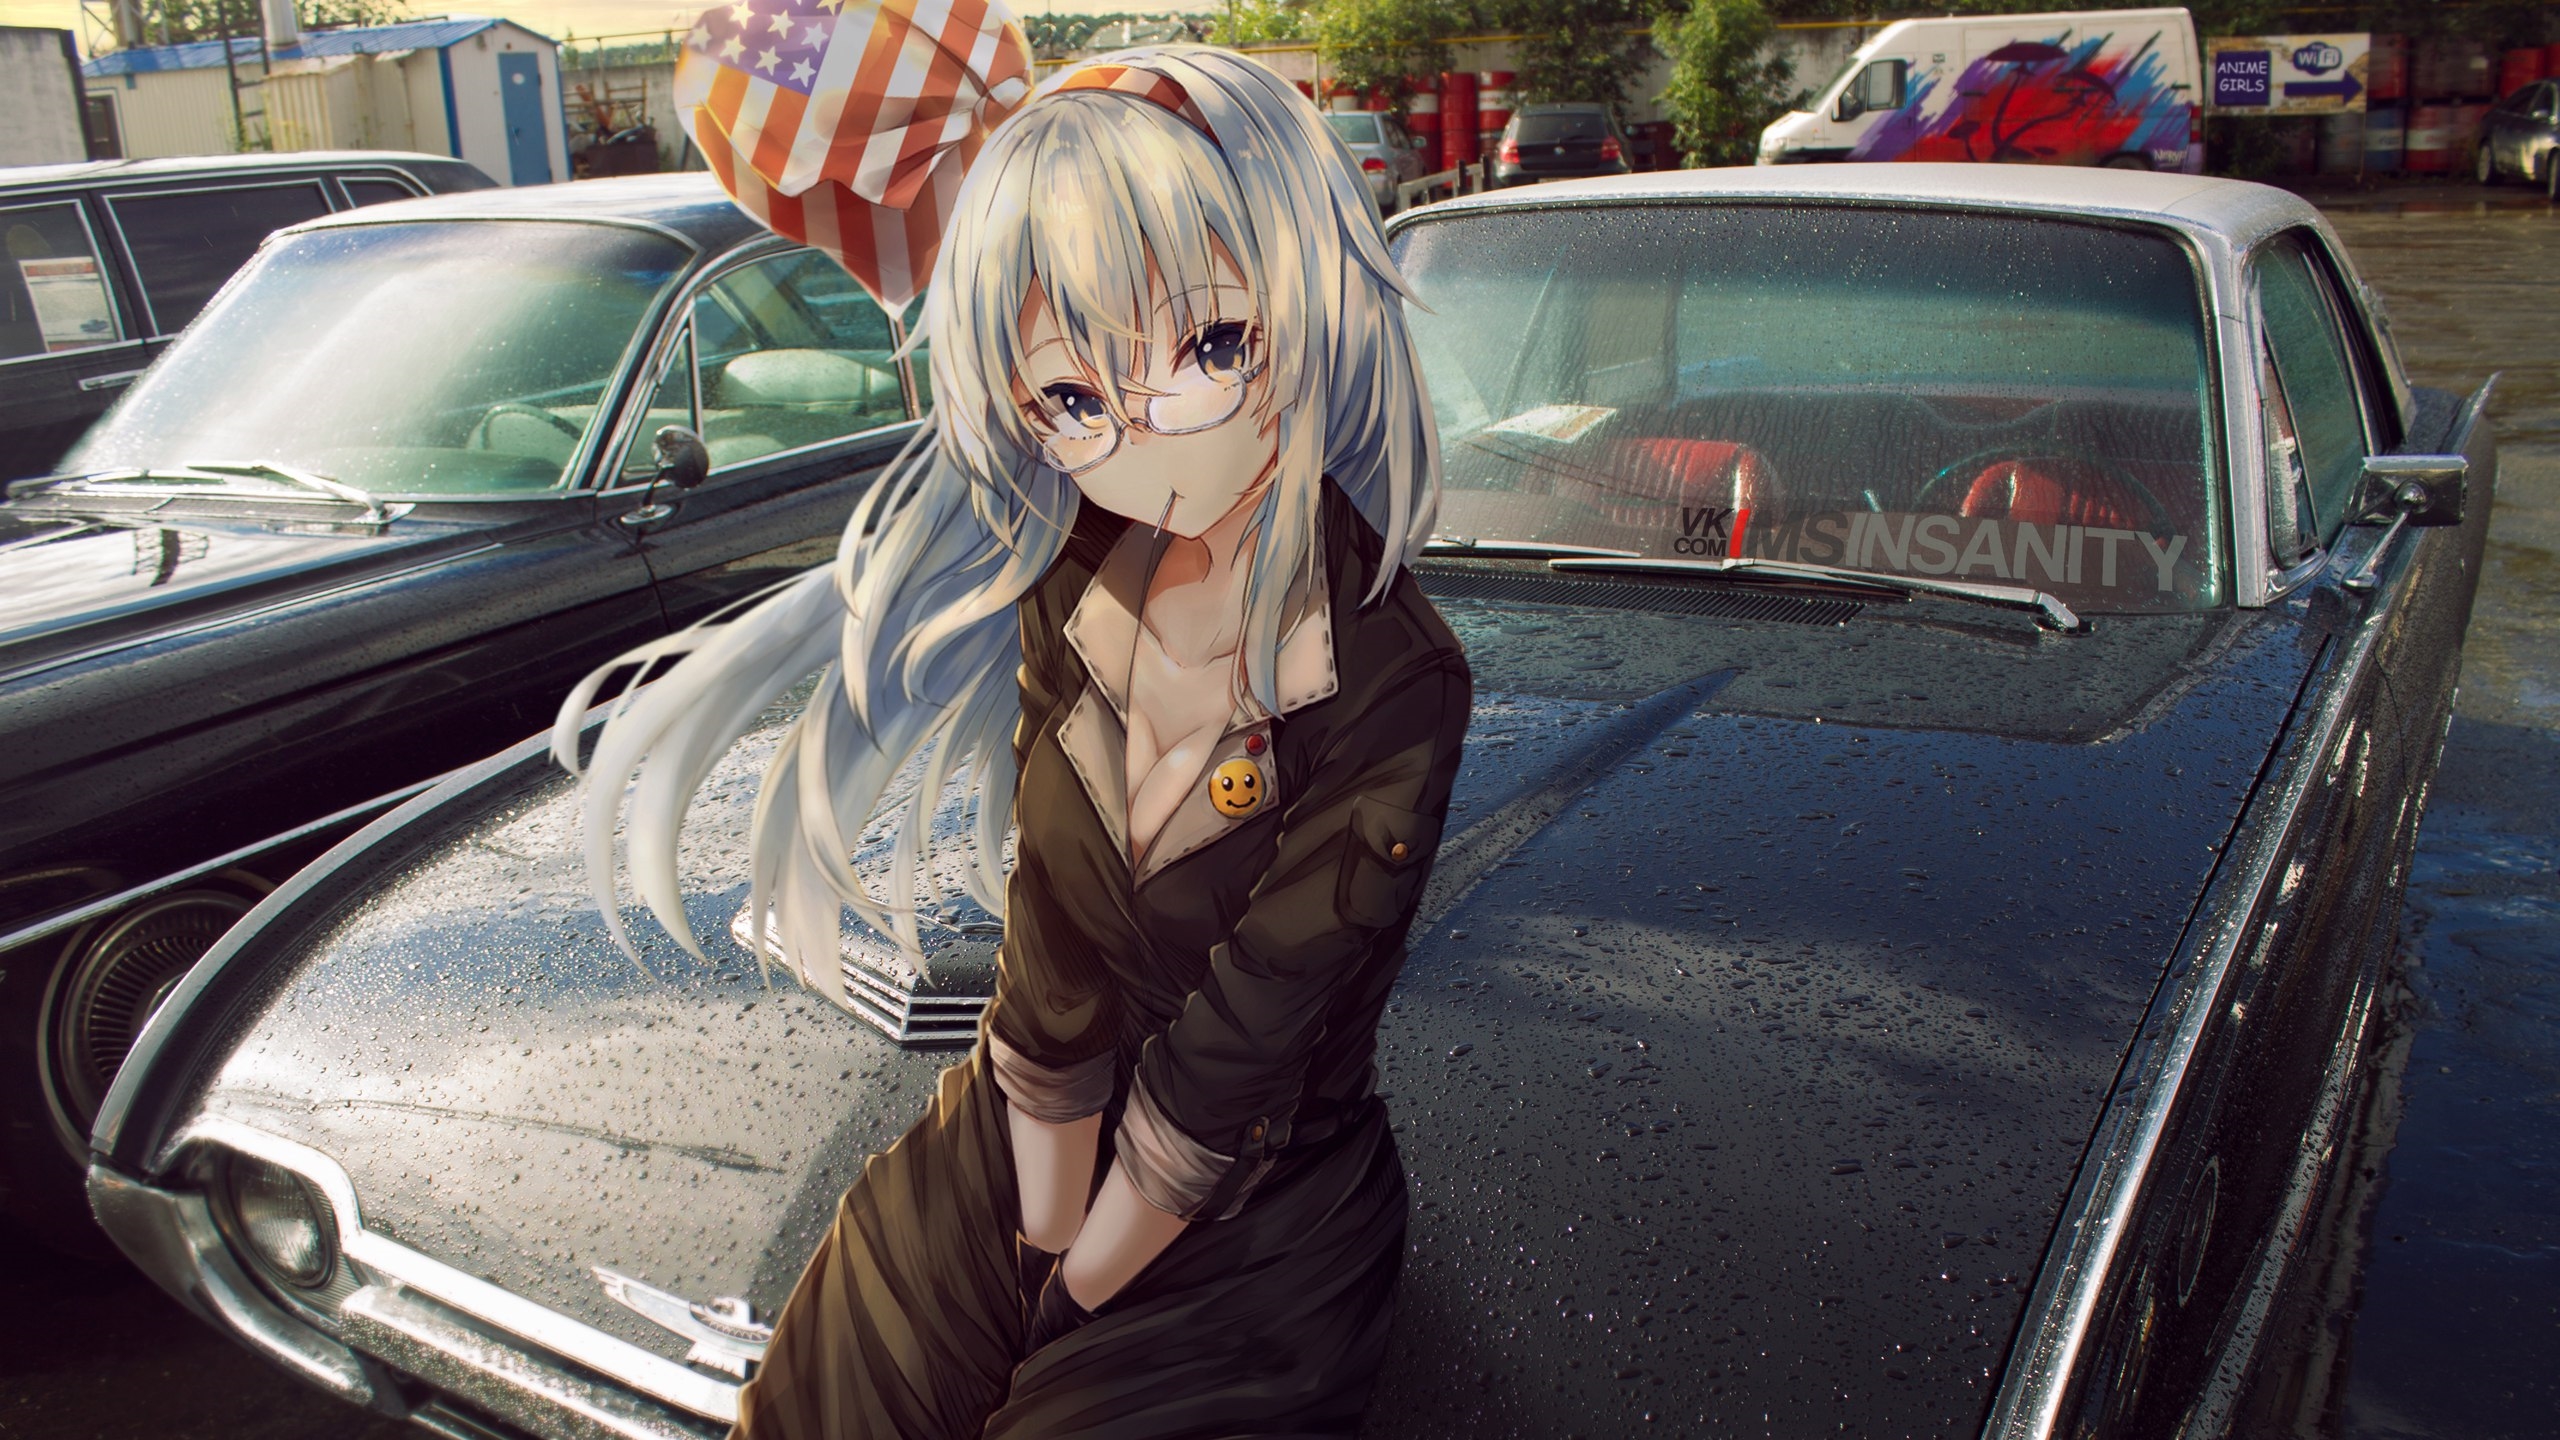 Anime 2560x1440 anime girls white hair women with cars car silver hair brown eyes glasses cleavage animeirl